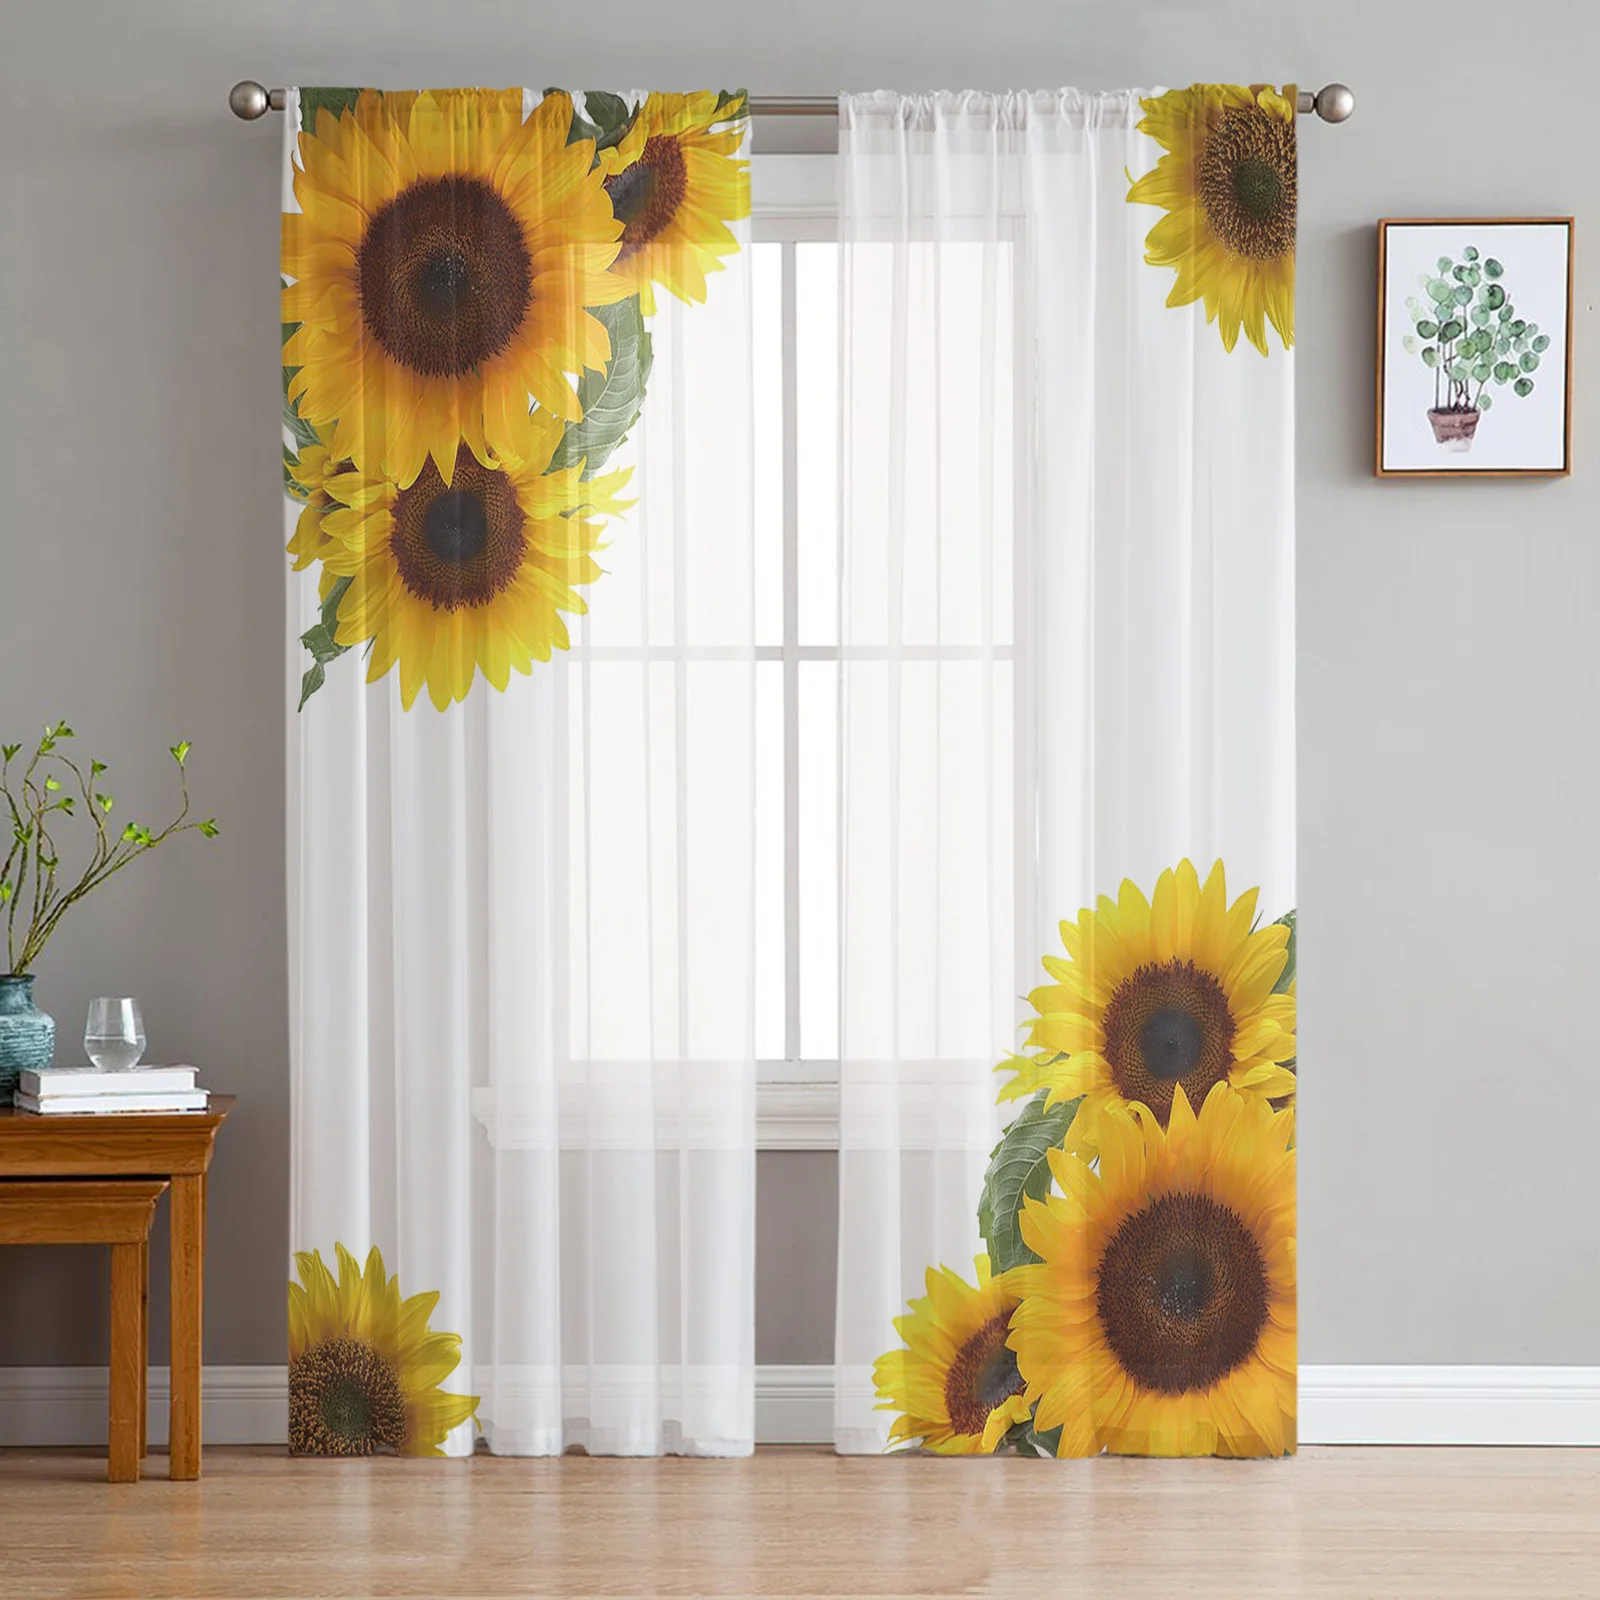 Sunflower Print Window Door Curtain Tulle Voile Curtains for Living Room Bedroom 